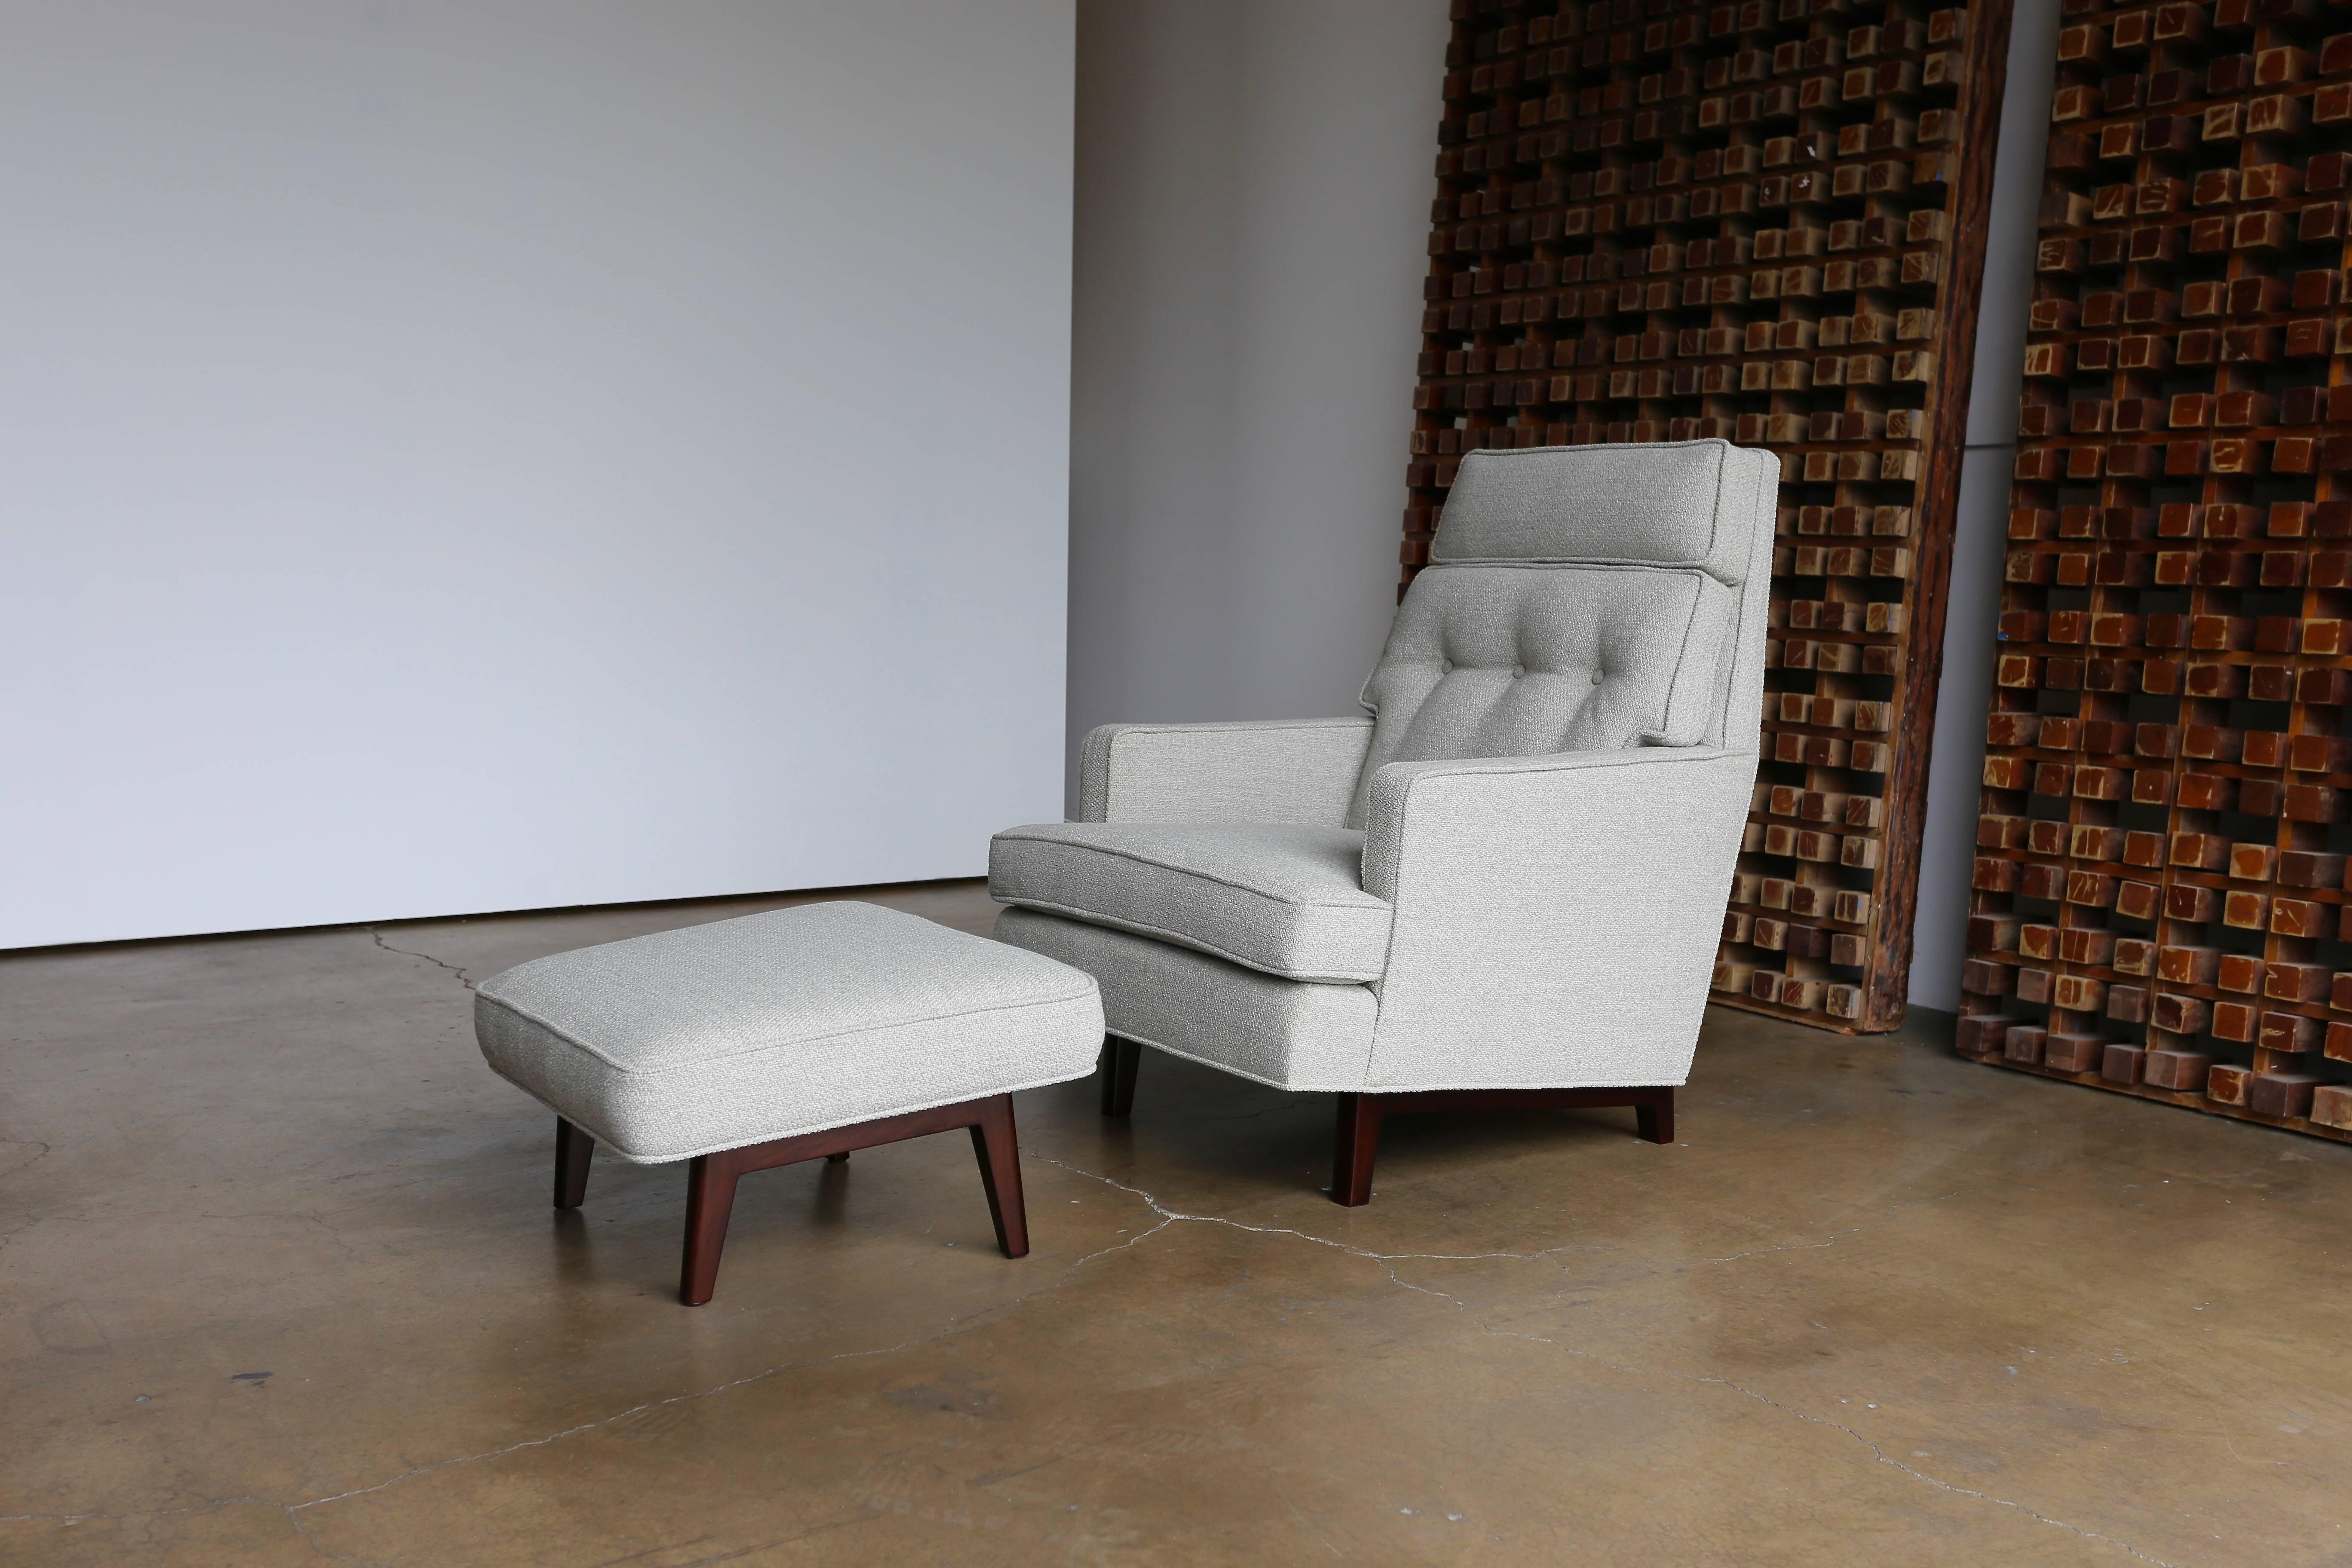 Lounge chair and ottoman by Edward Wormley for Dunbar. This piece has been professionally restored.